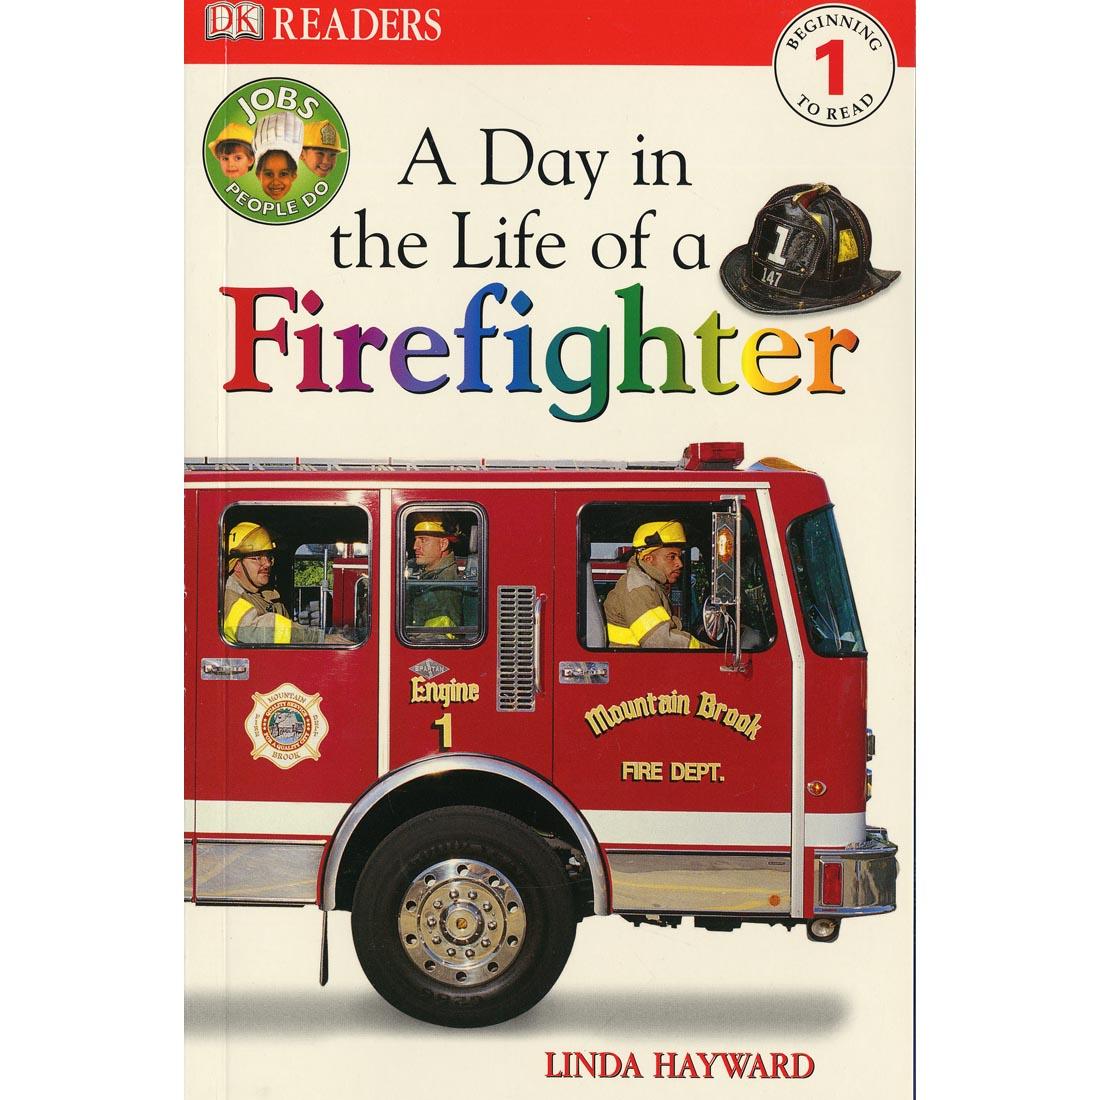 DK Readers Level 1 Book: A Day in the Life of a Firefighter